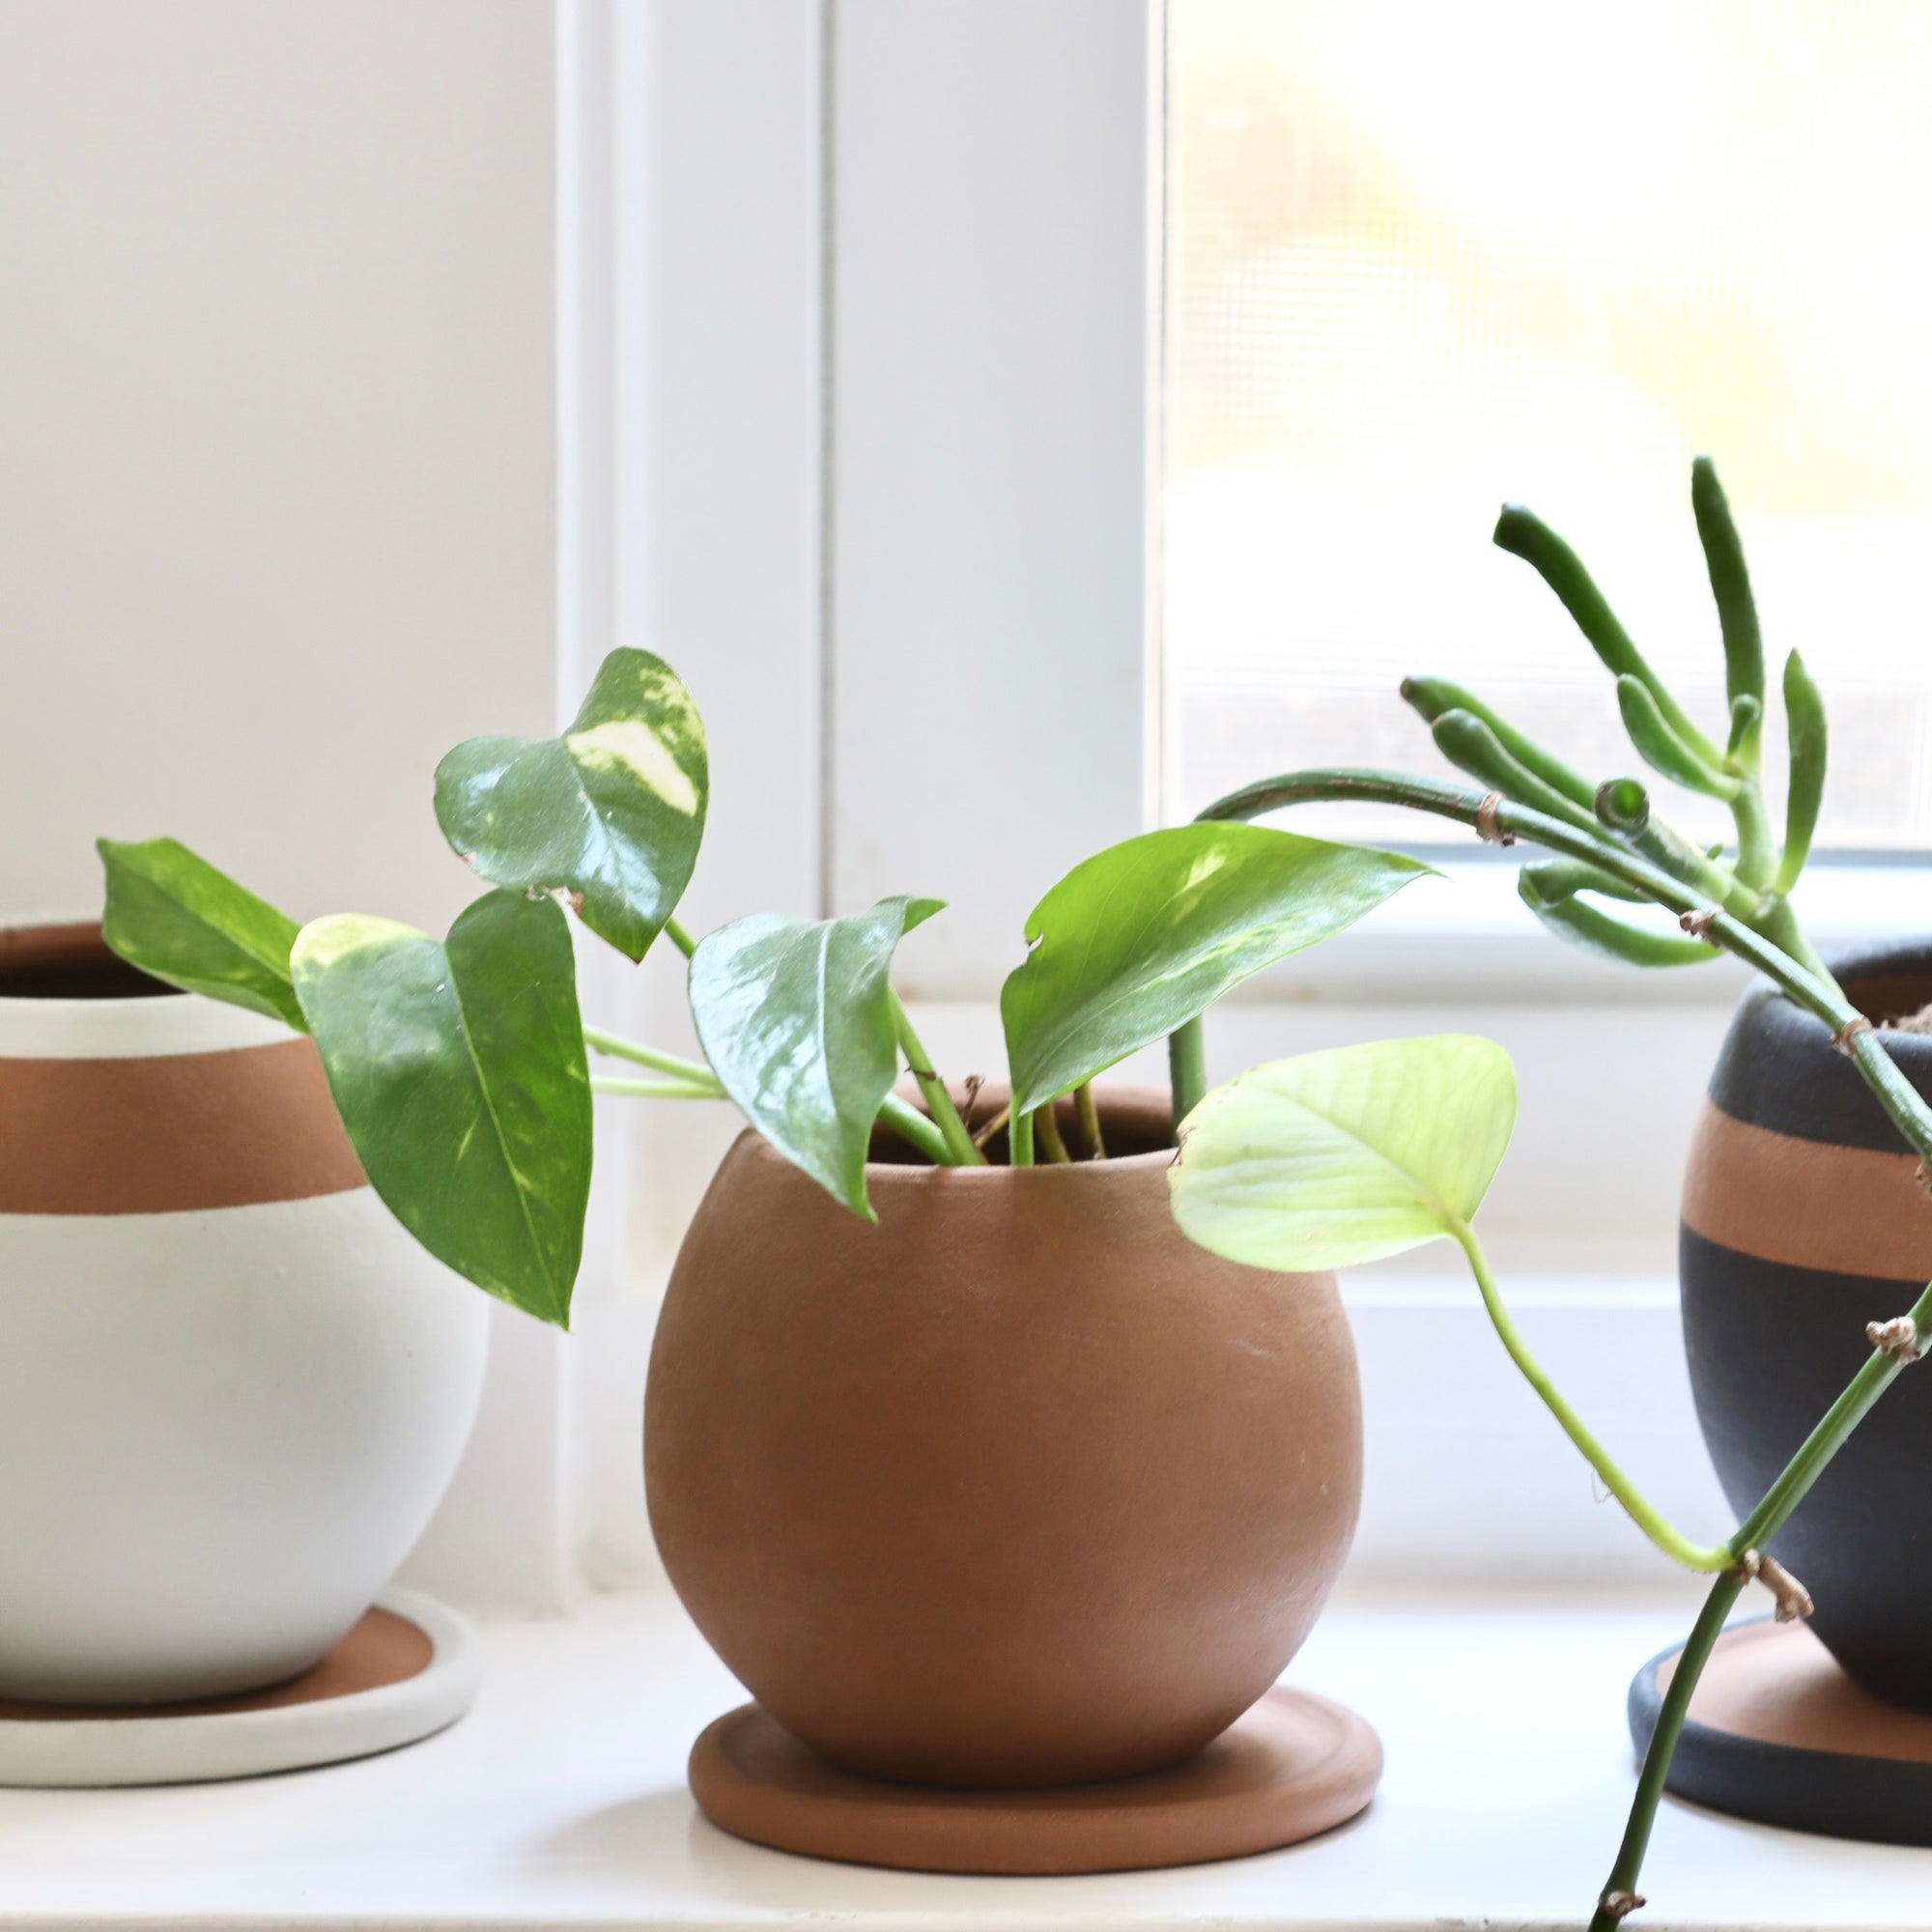 It's Time to Repot your Plants